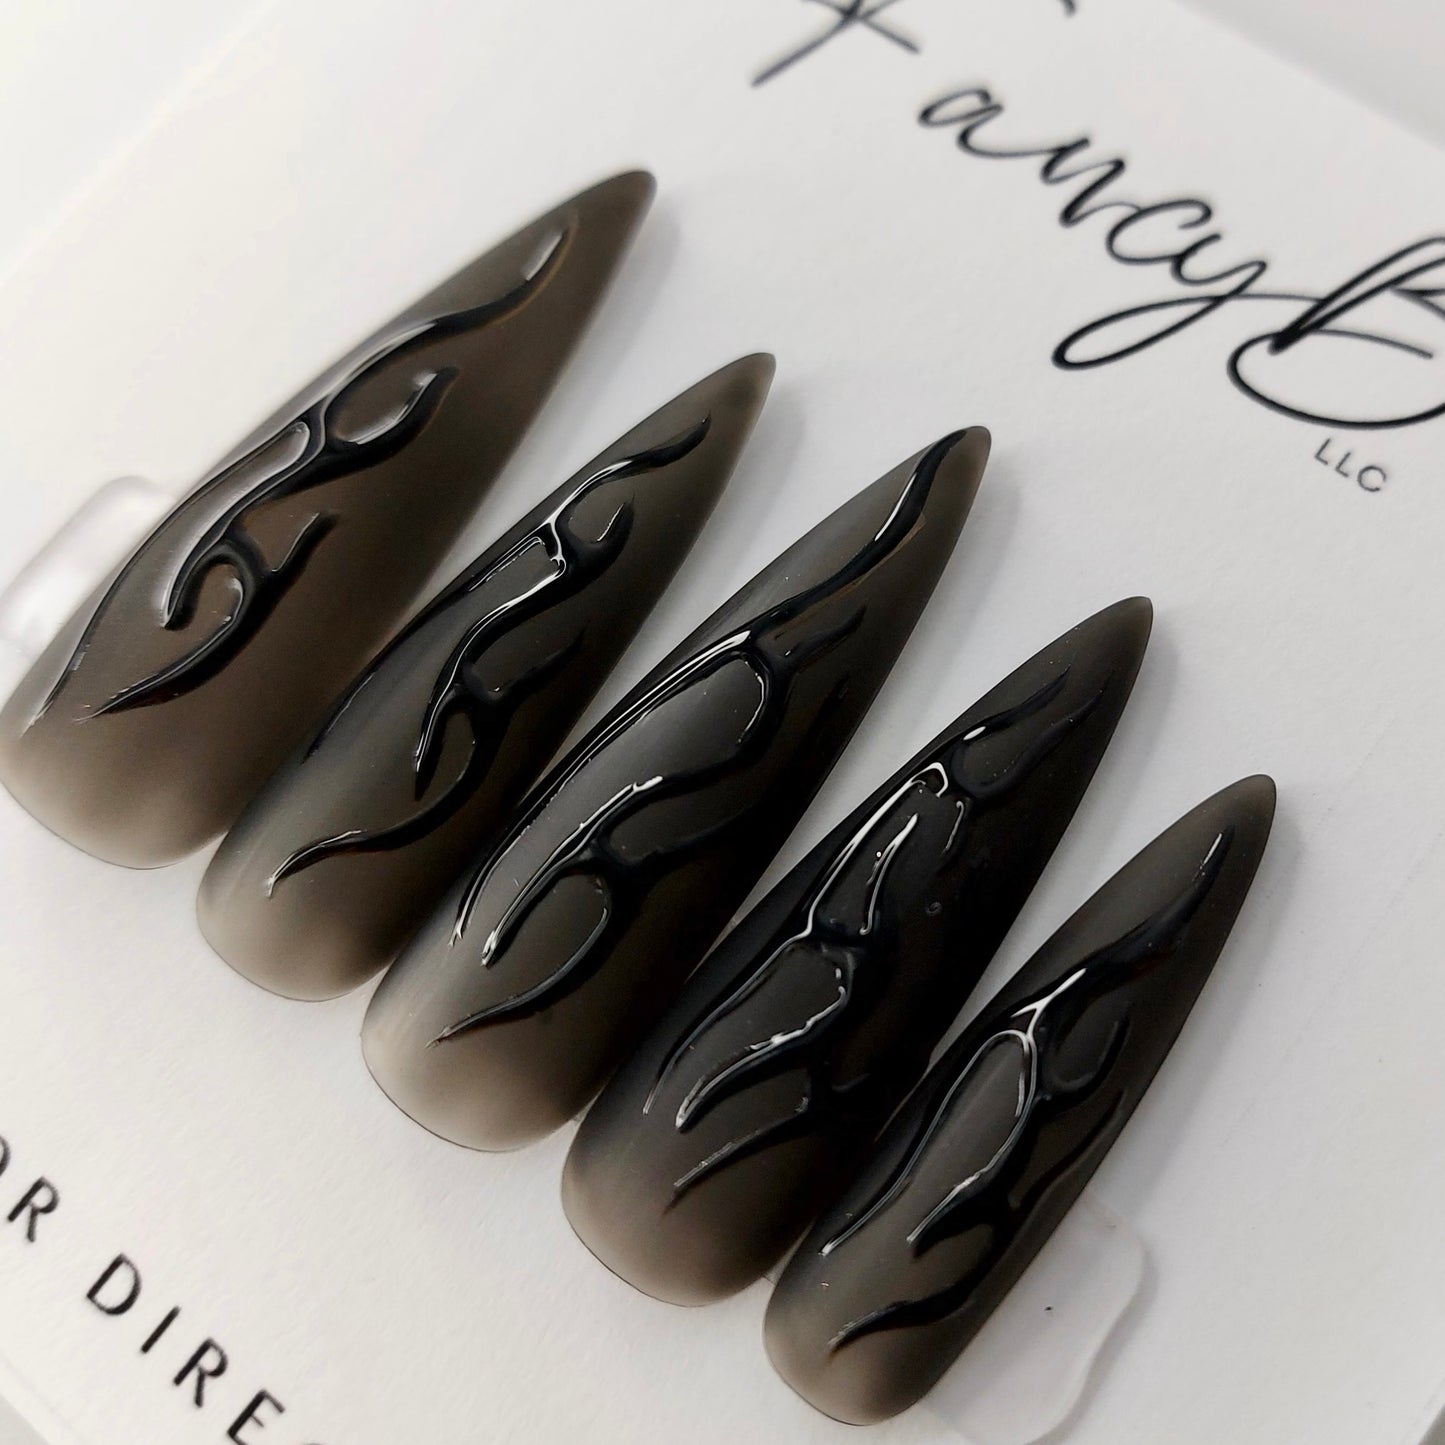 Custom press on nails, goth theme nails with matte black jelly base and gloss flame designs in extra long stiletto shape. FancyB Press on Nails.